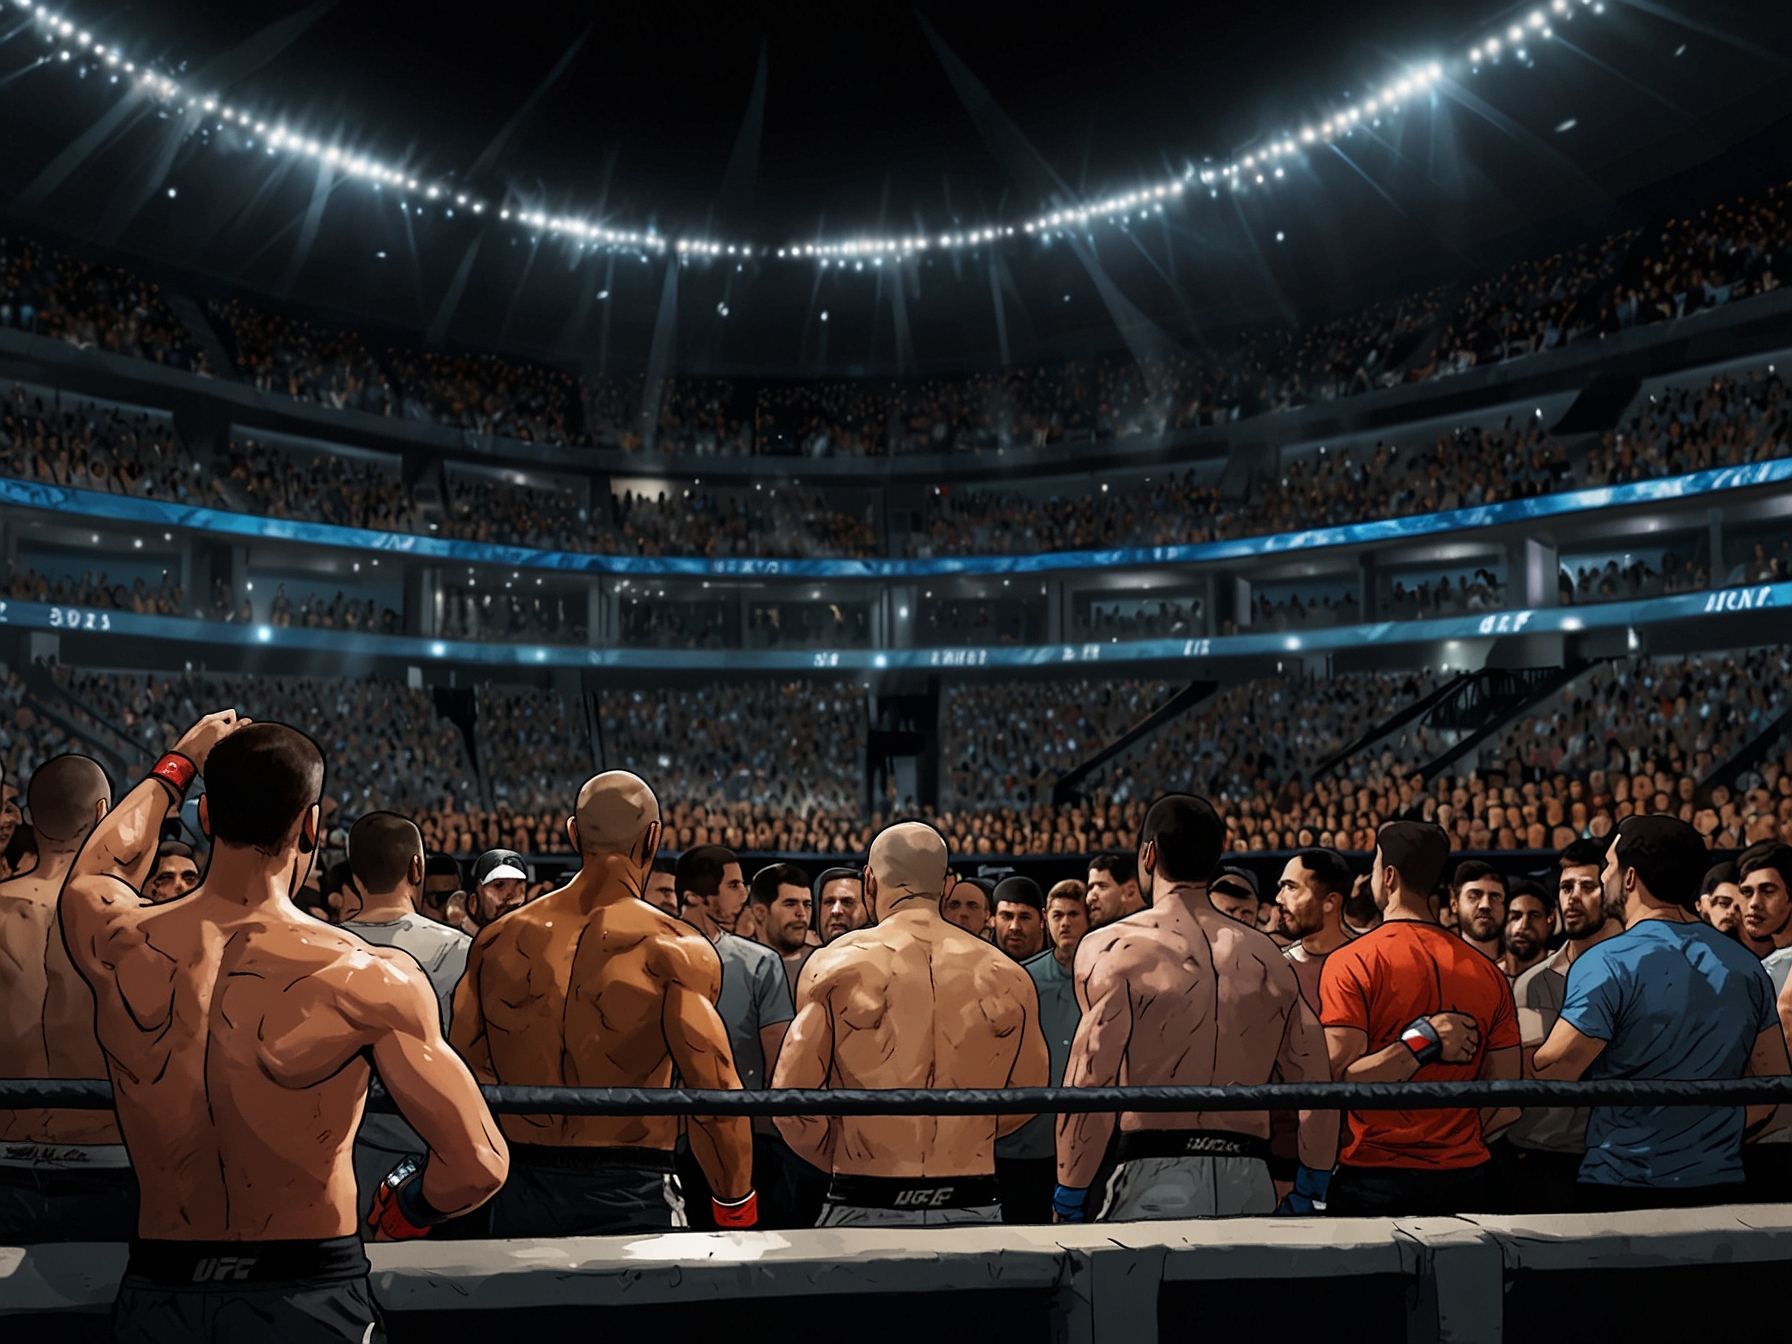 An animated crowd at a grand arena in Abu Dhabi, emphasizing the excitement and anticipation for Khamzat Chimaev's potential return to the Octagon in the upcoming UFC event.